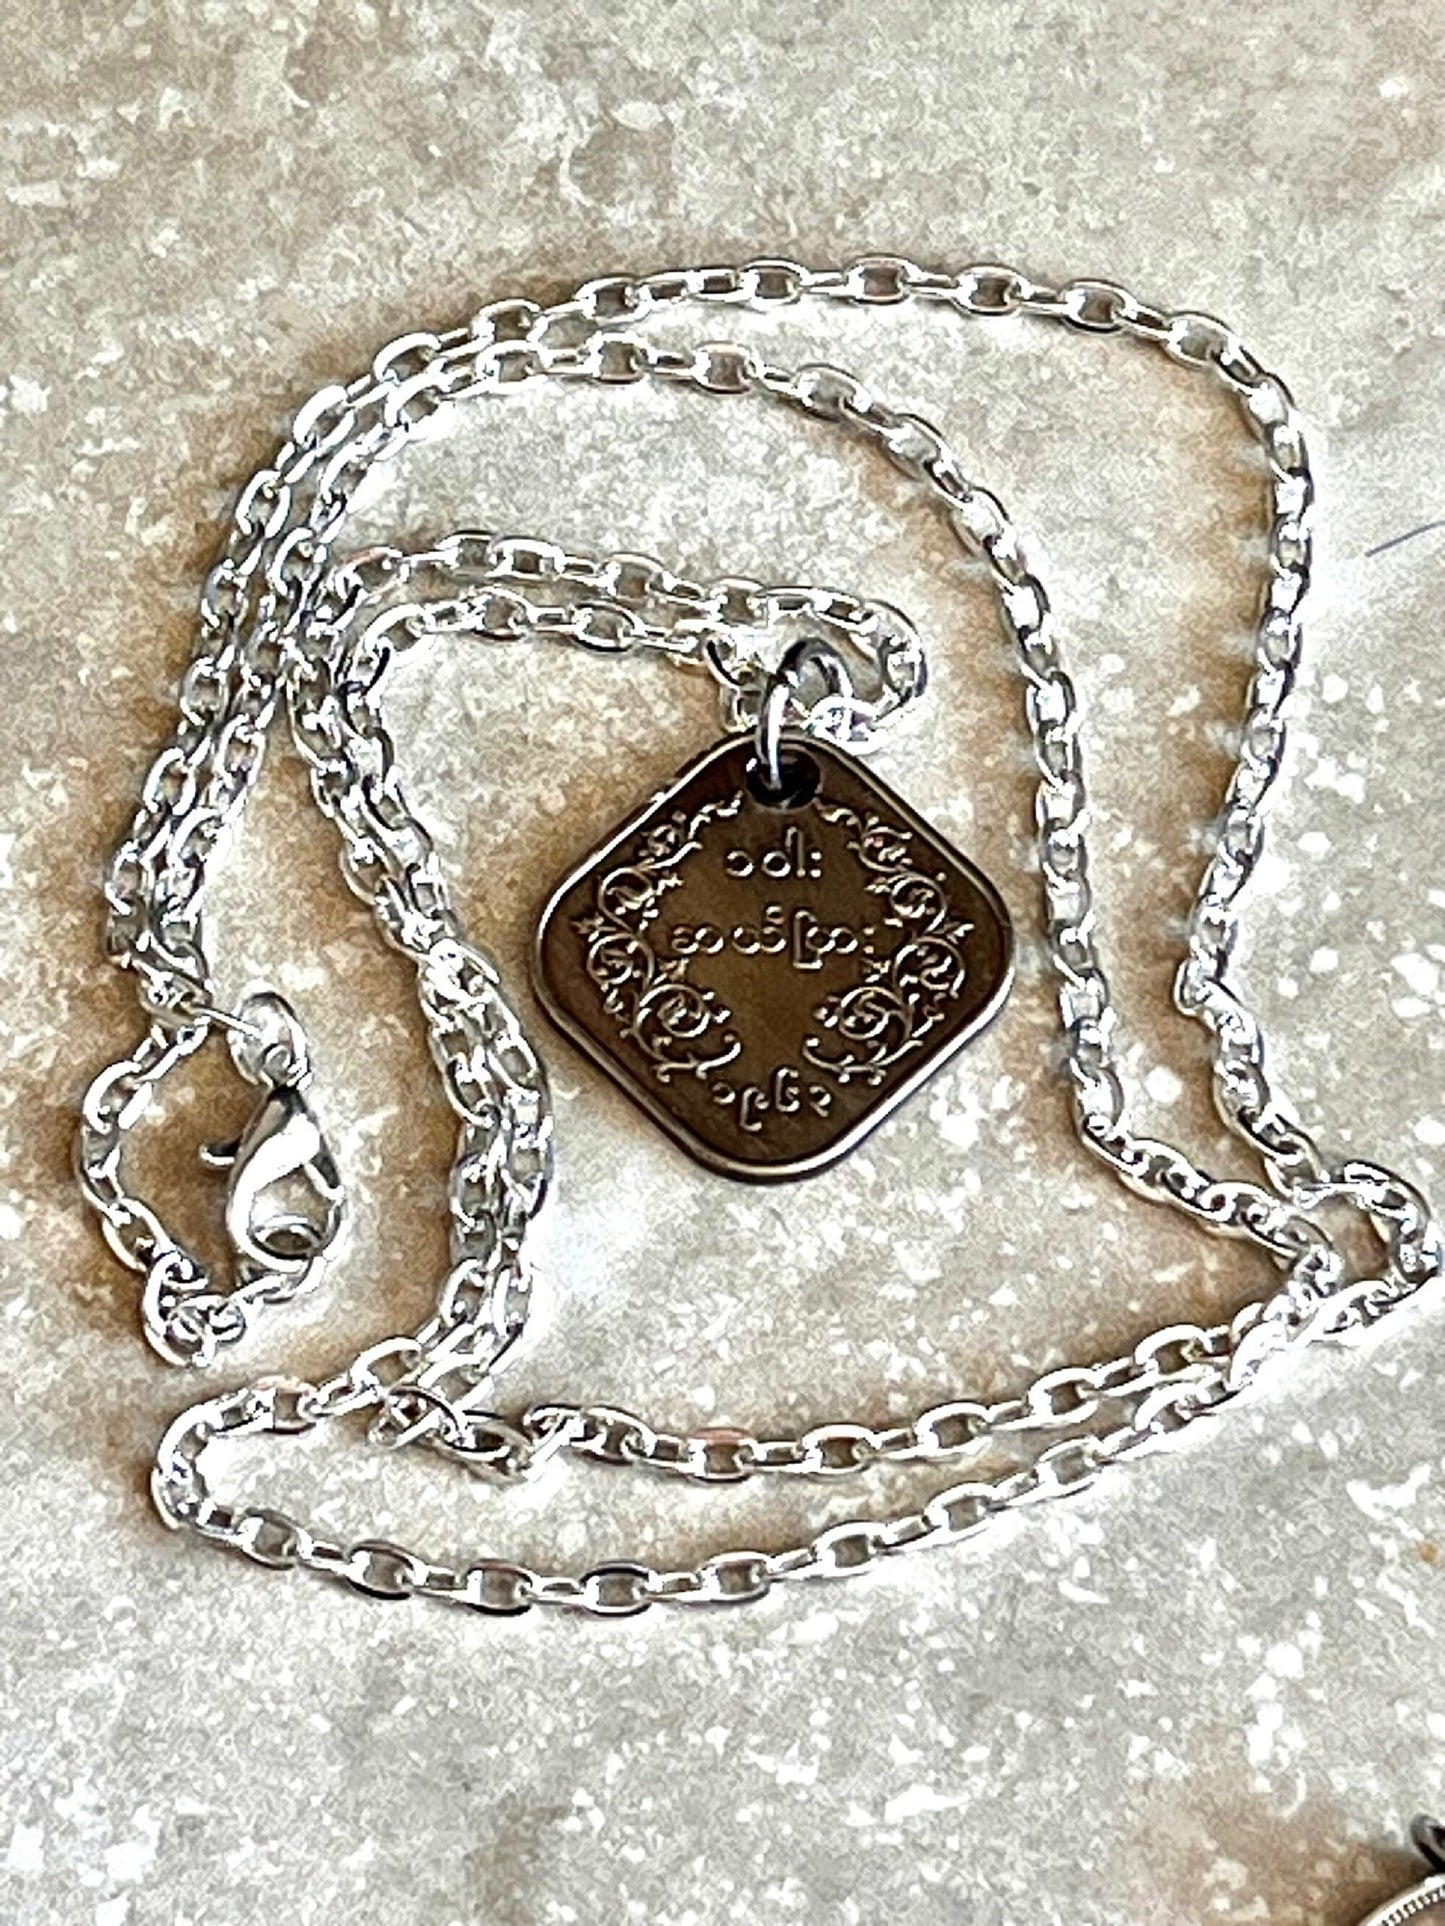 Myanmar Coin Pendant Myanmar Burma 25 Mya Personal Necklace Old Vintage Handmade Jewelry Gift Friend Charm For Him Her World Coin Collector